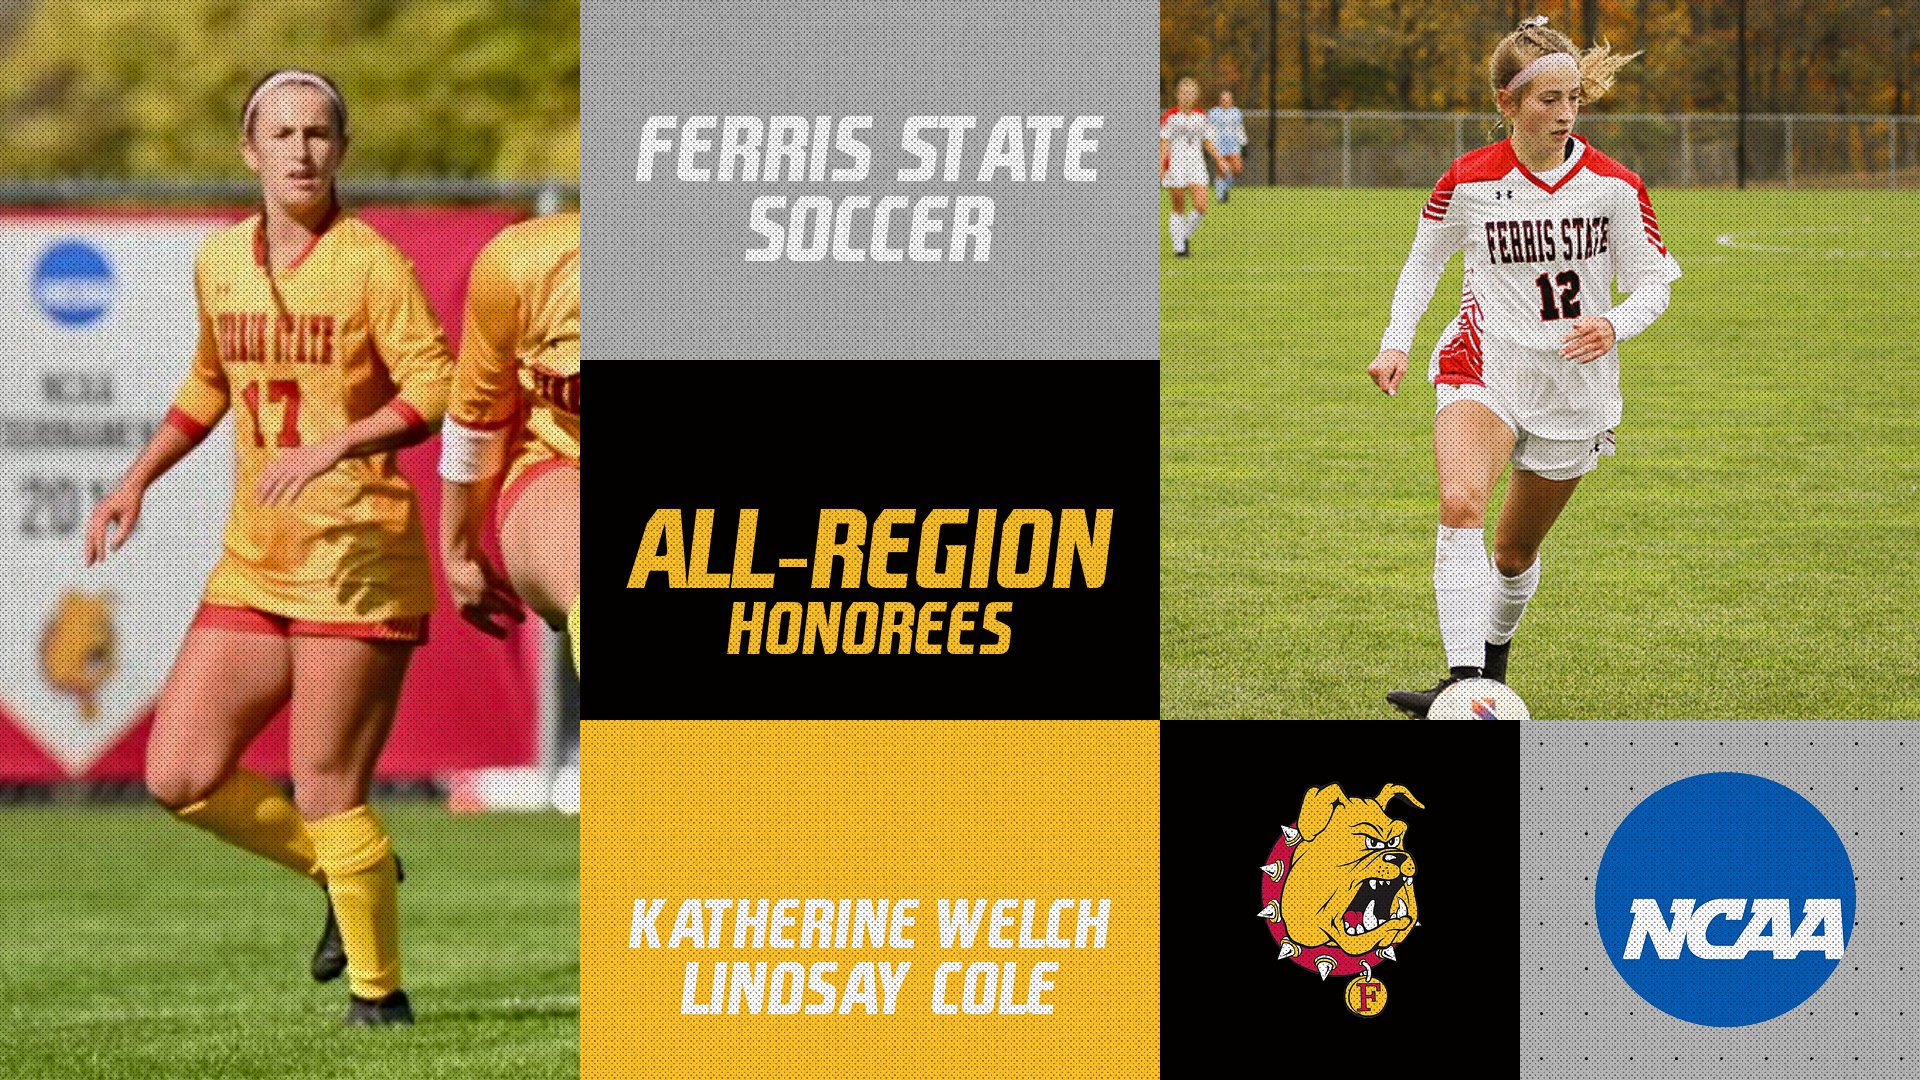 Two Ferris State Soccer Standouts Earn All-Region Team Recognition